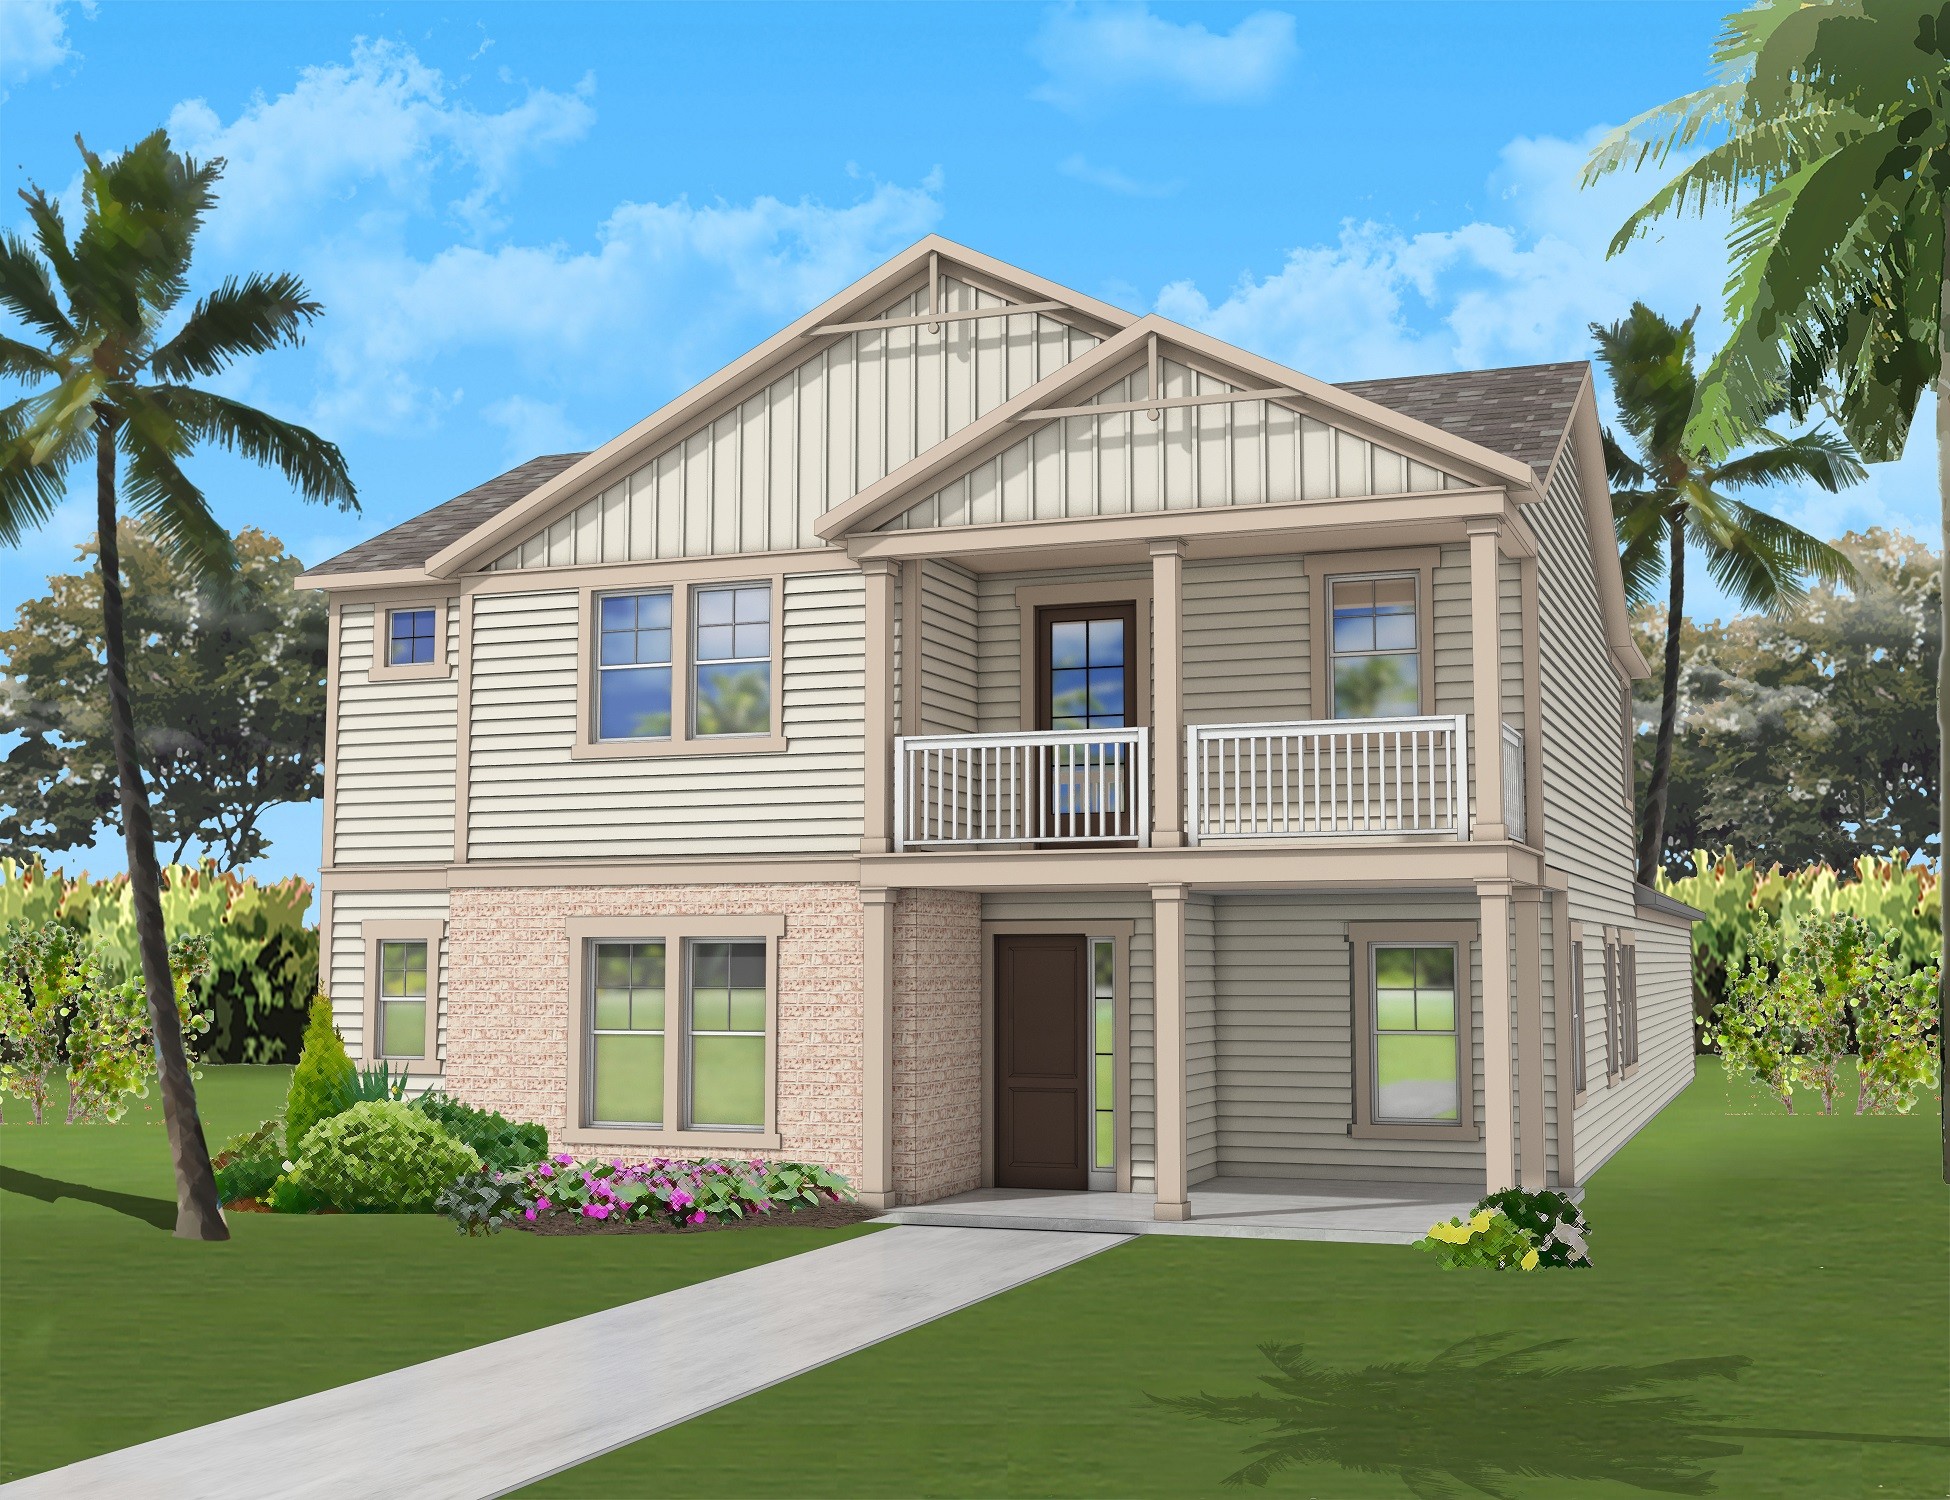 More than 30 home designs by Mattamy Homes, including the Charleston, are available at RiverTown.